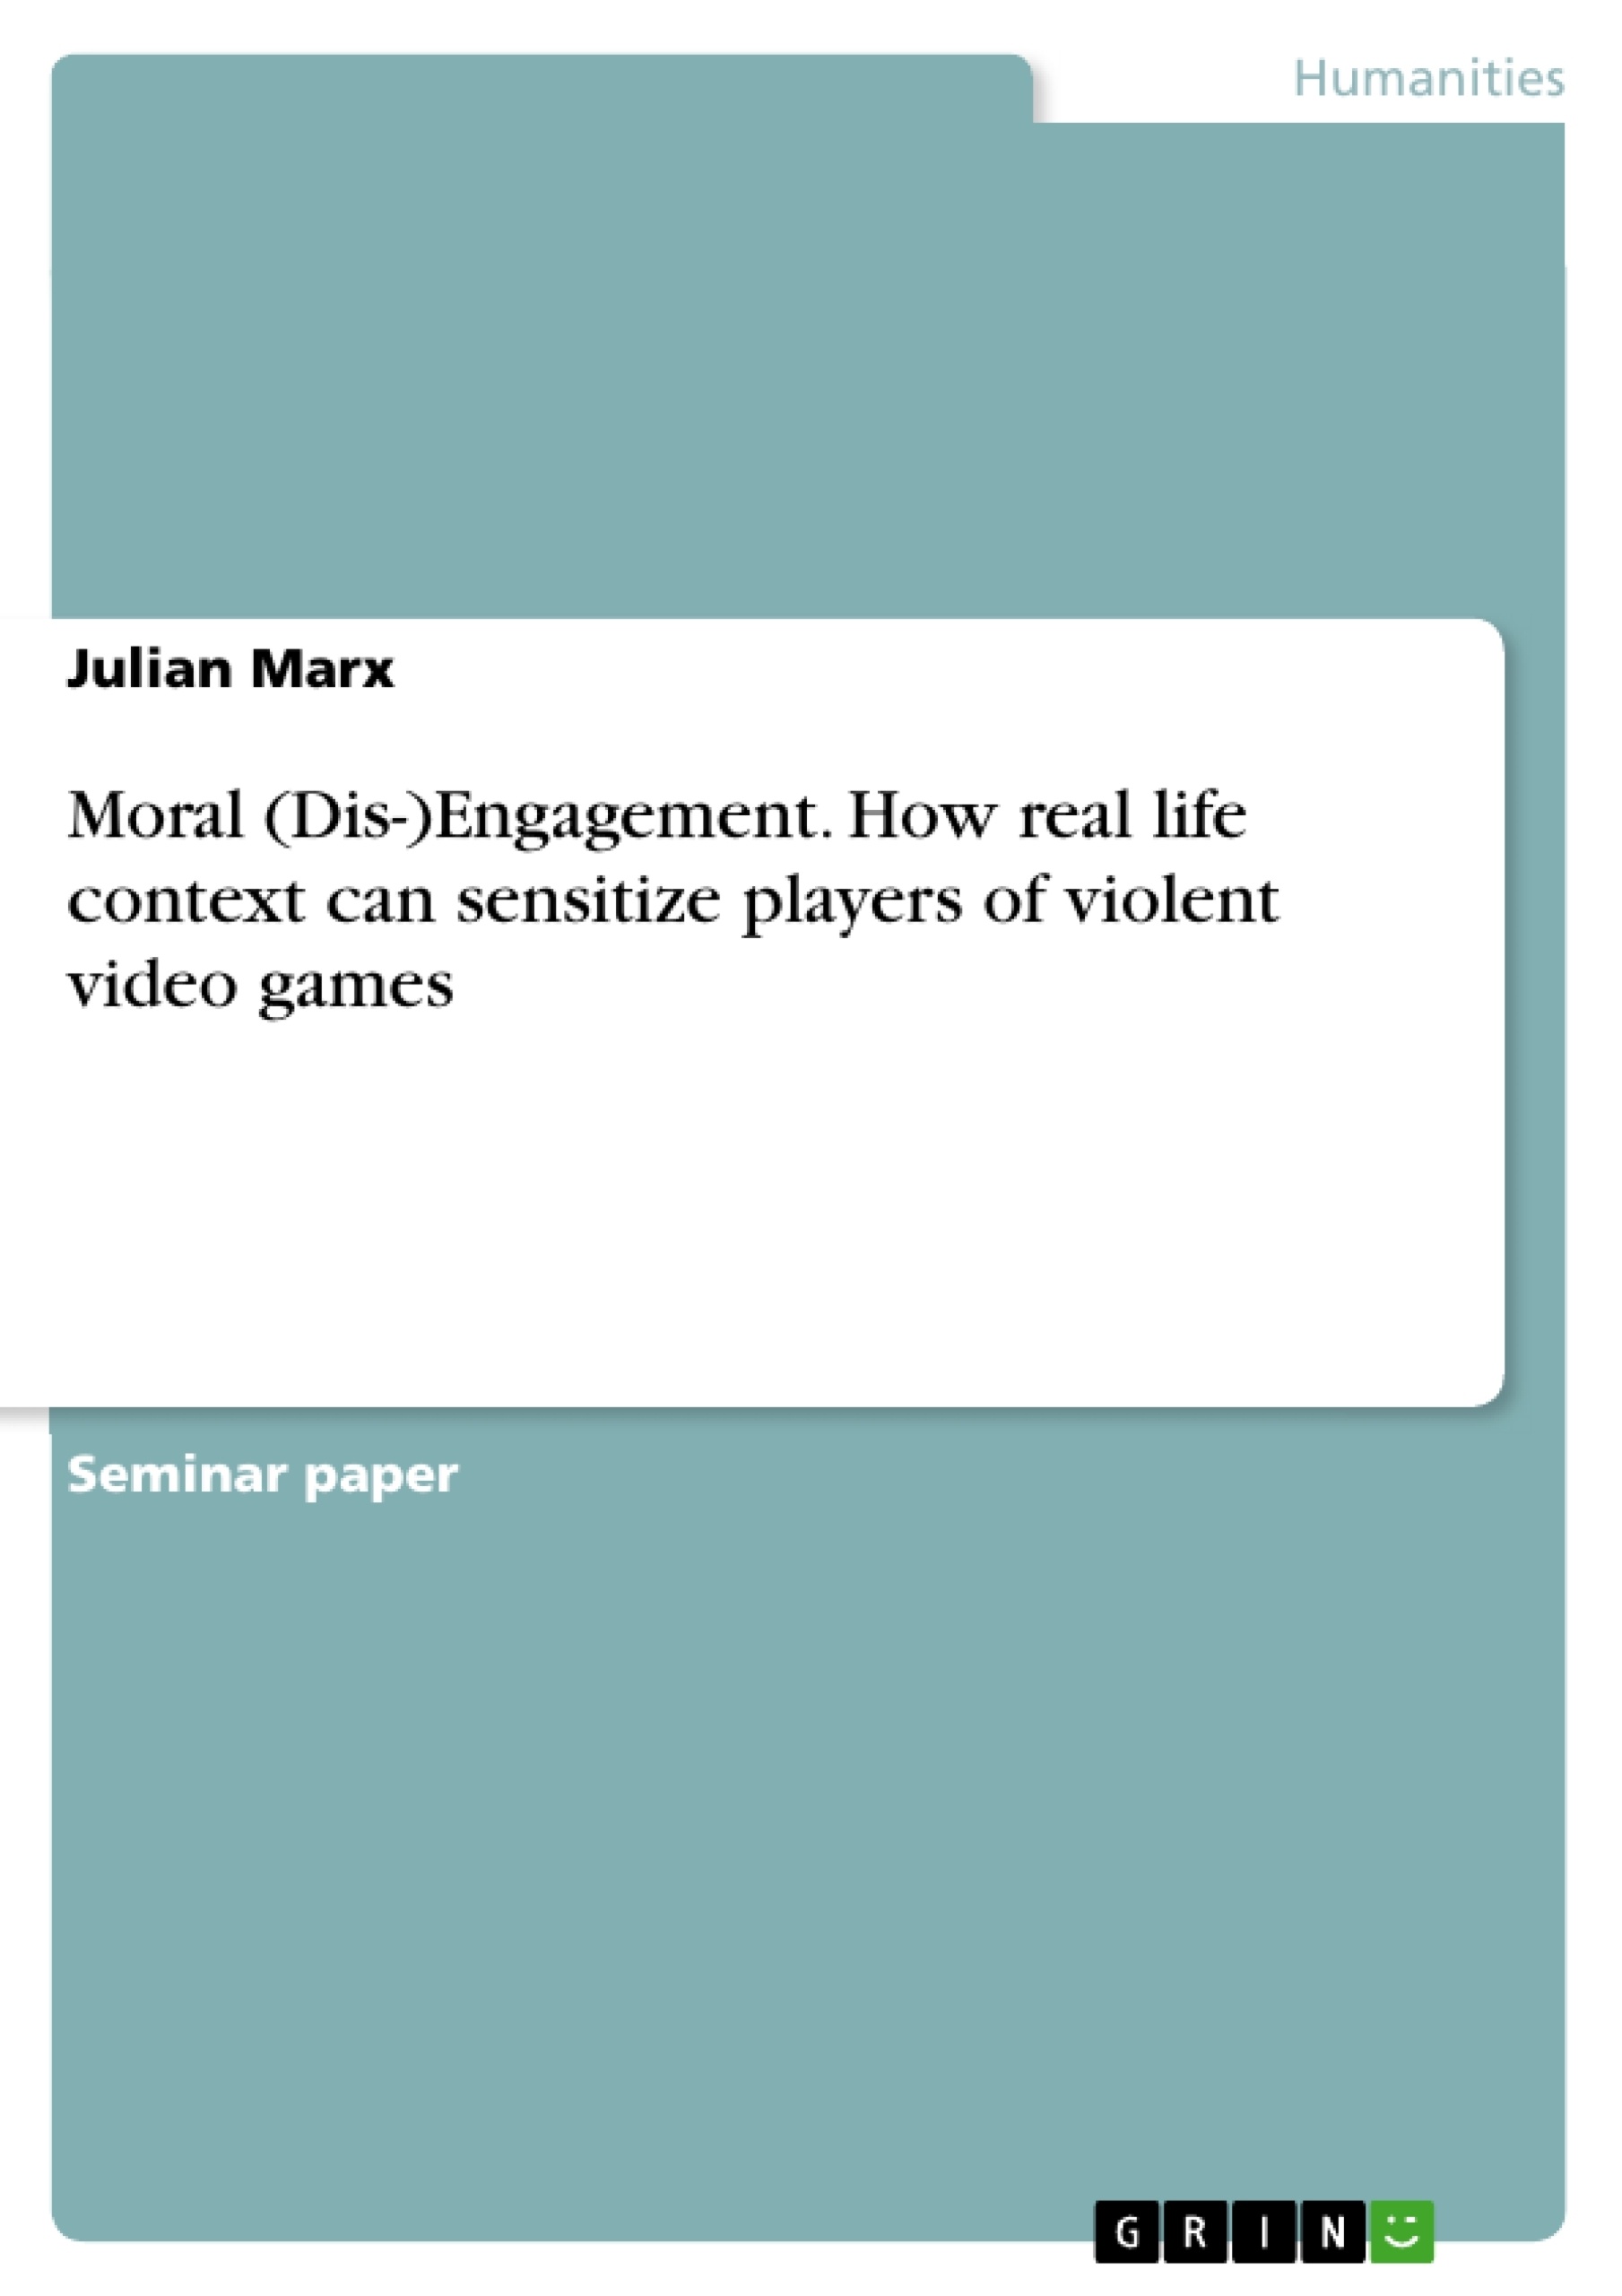 Title: Moral (Dis-)Engagement. How real life context can sensitize players of violent video games